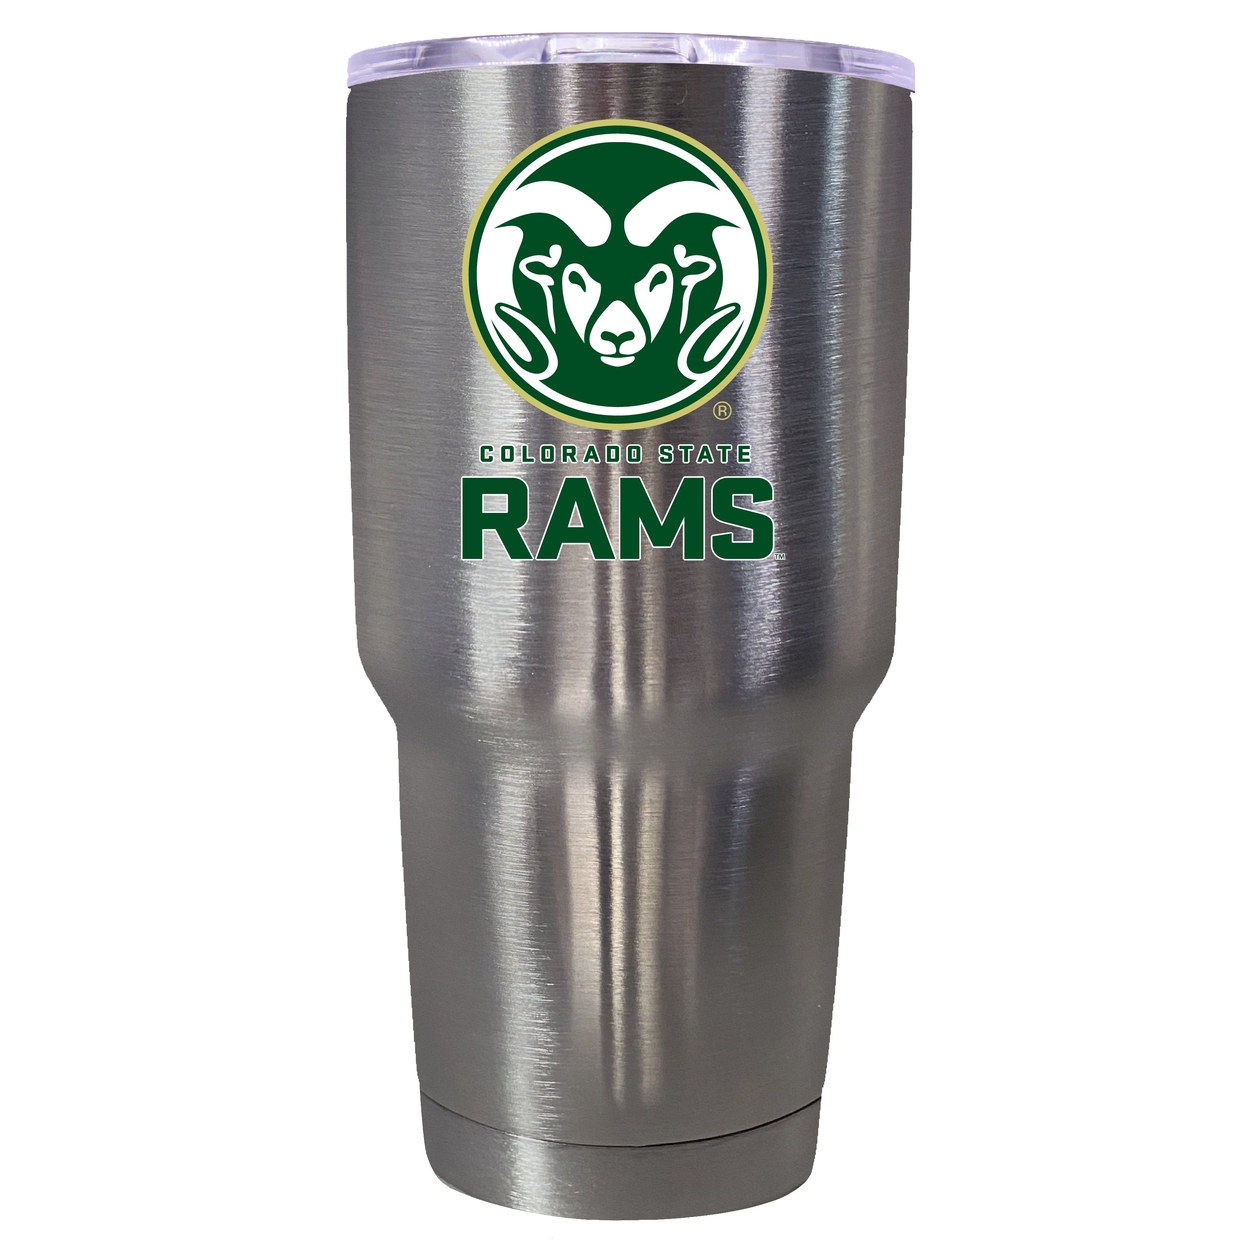 Colorado State Rams 24 Oz Insulated Stainless Steel Tumbler